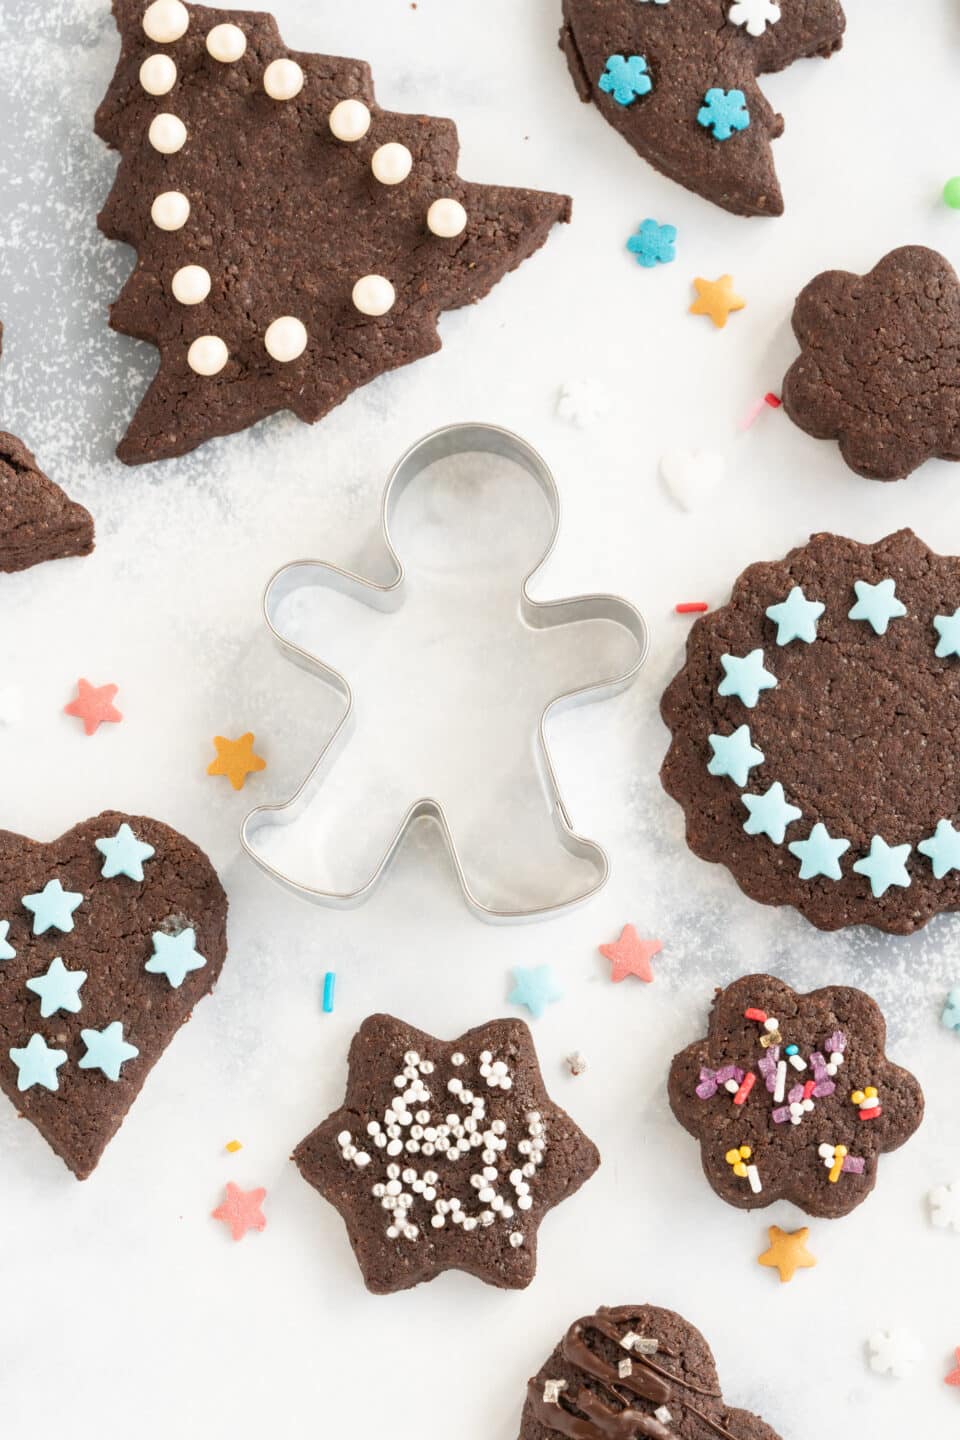 Cut-Out Cookies with Cocoa for Decorating